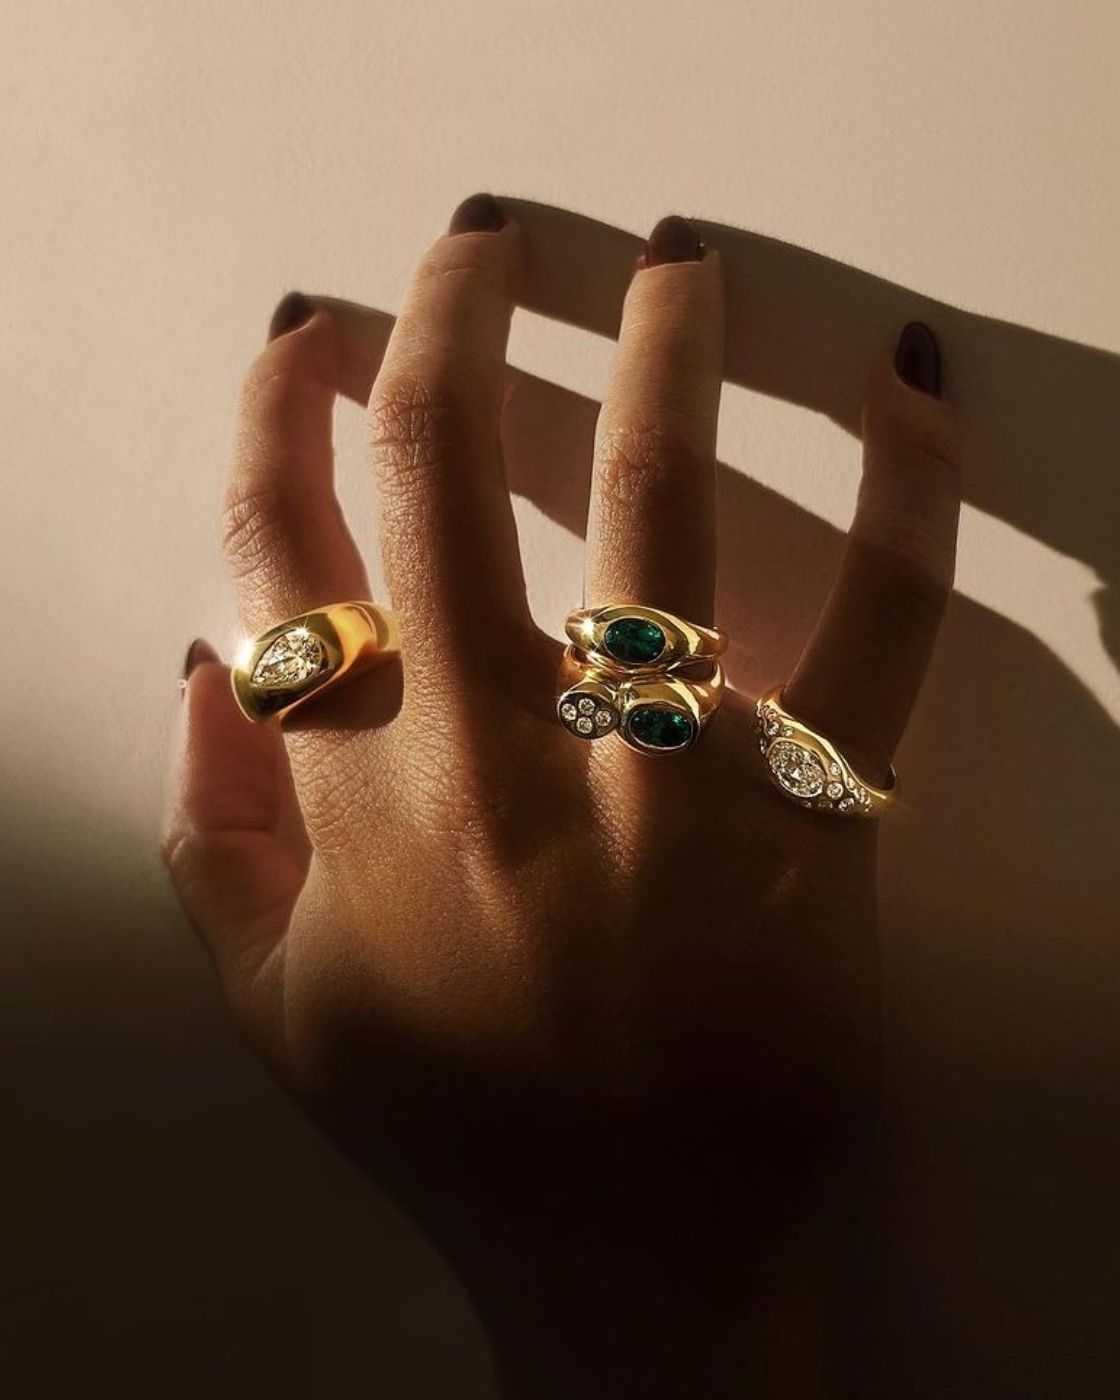 Curve Yellow Gold Emerald Signet Ring